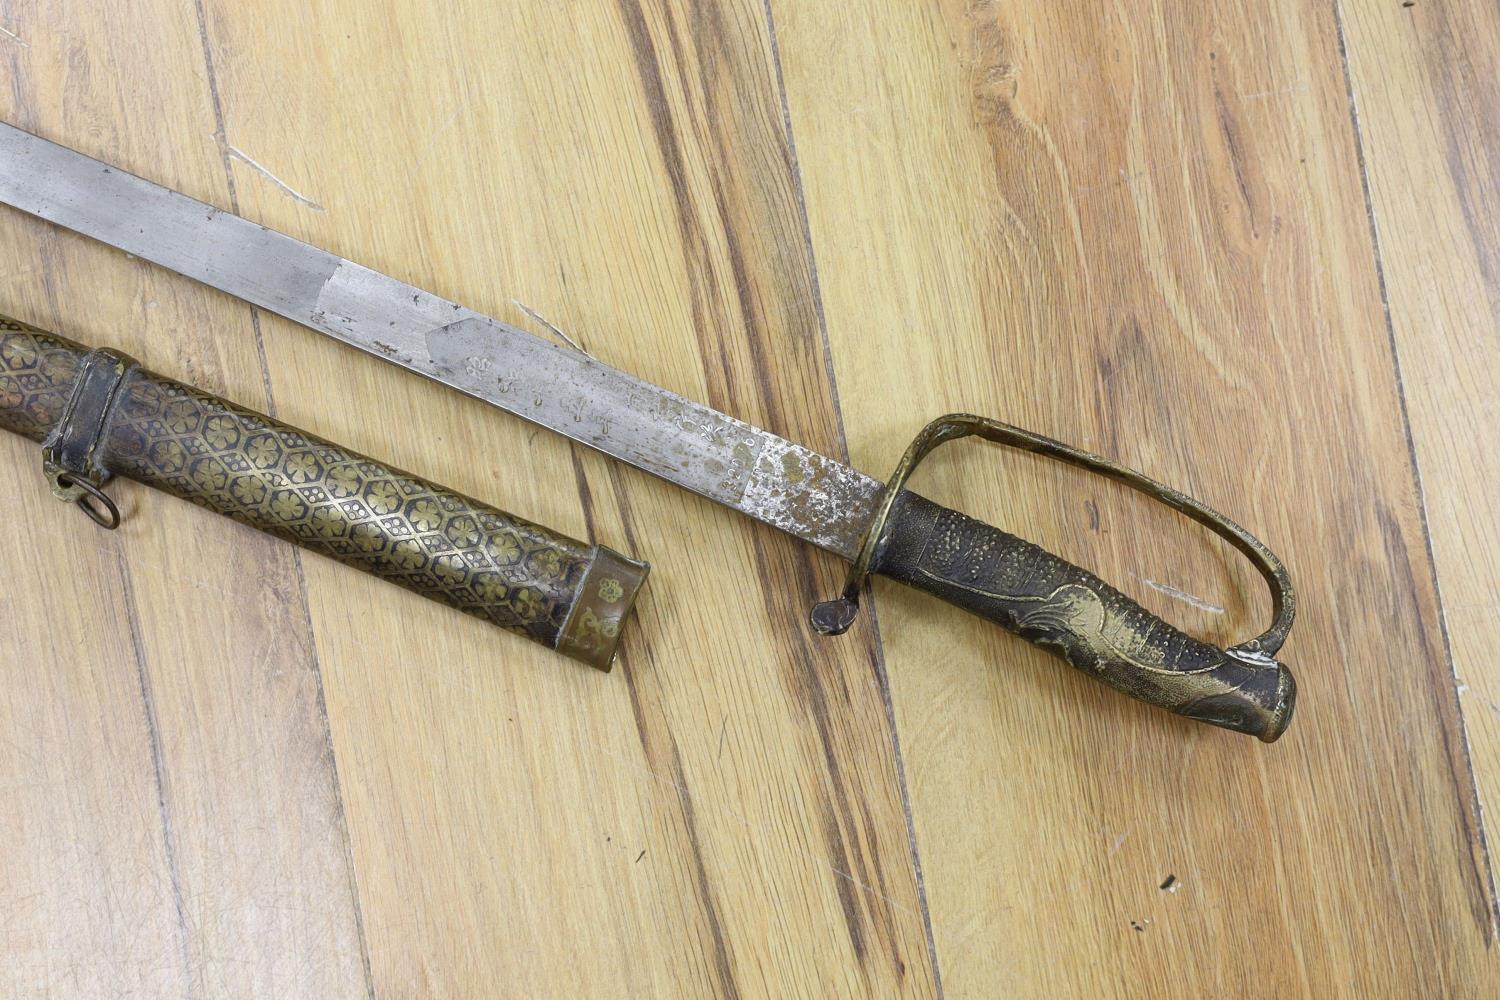 A Chinese sword, single edged blade 64cm, in etched brass scabbard - Image 2 of 7